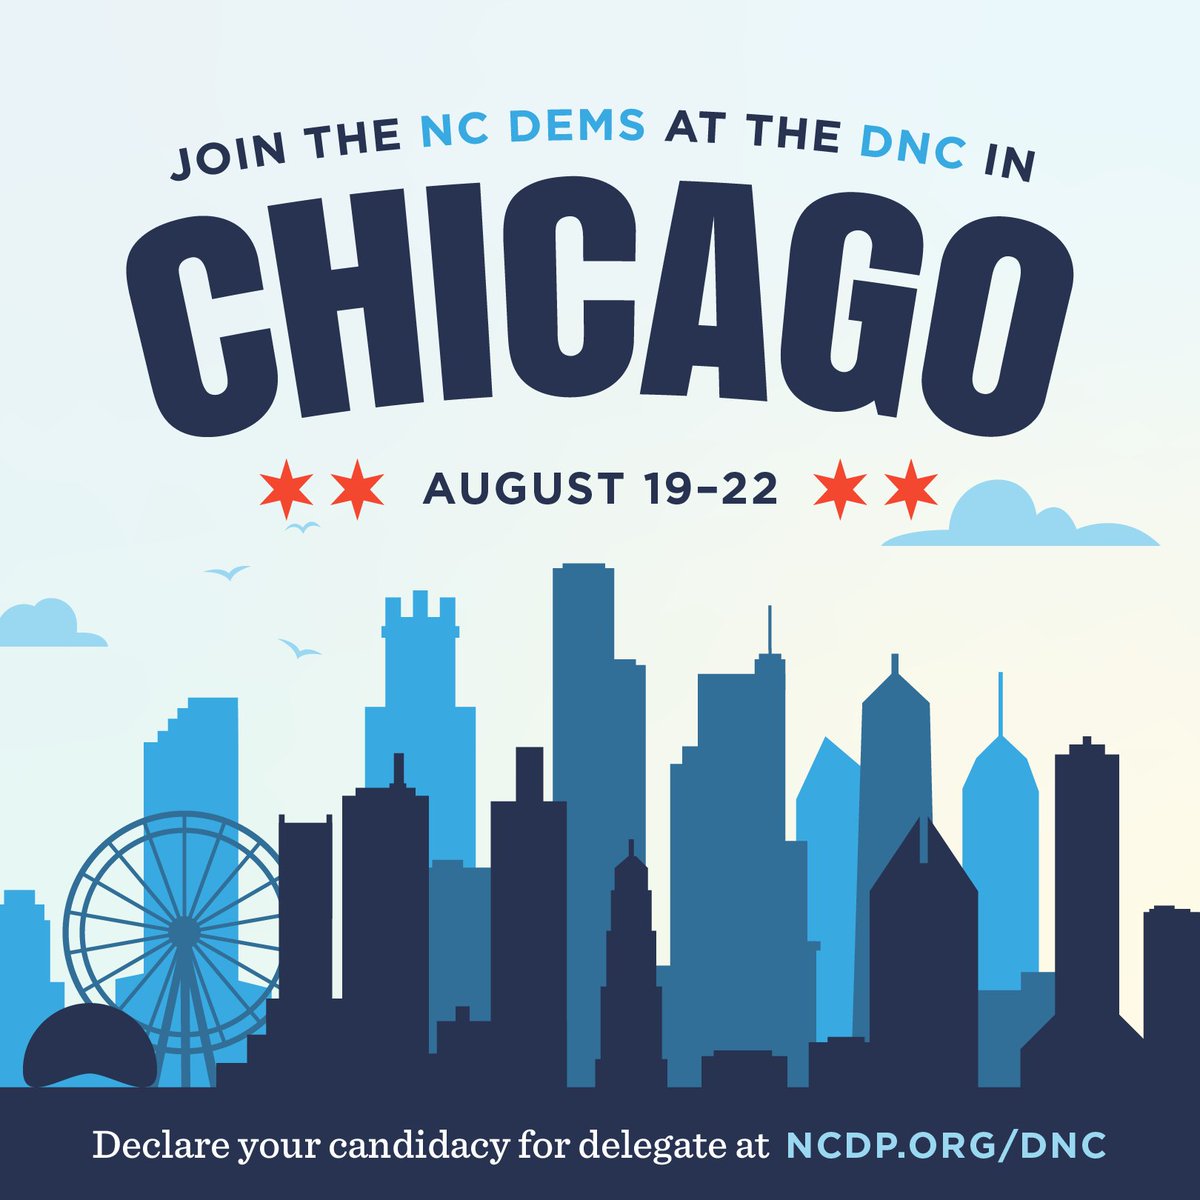 Still thinking about joining the North Carolina Dems in Chicago? Today is your last chance to apply! Sign up to run for delegate at ncdp.org/dnc.